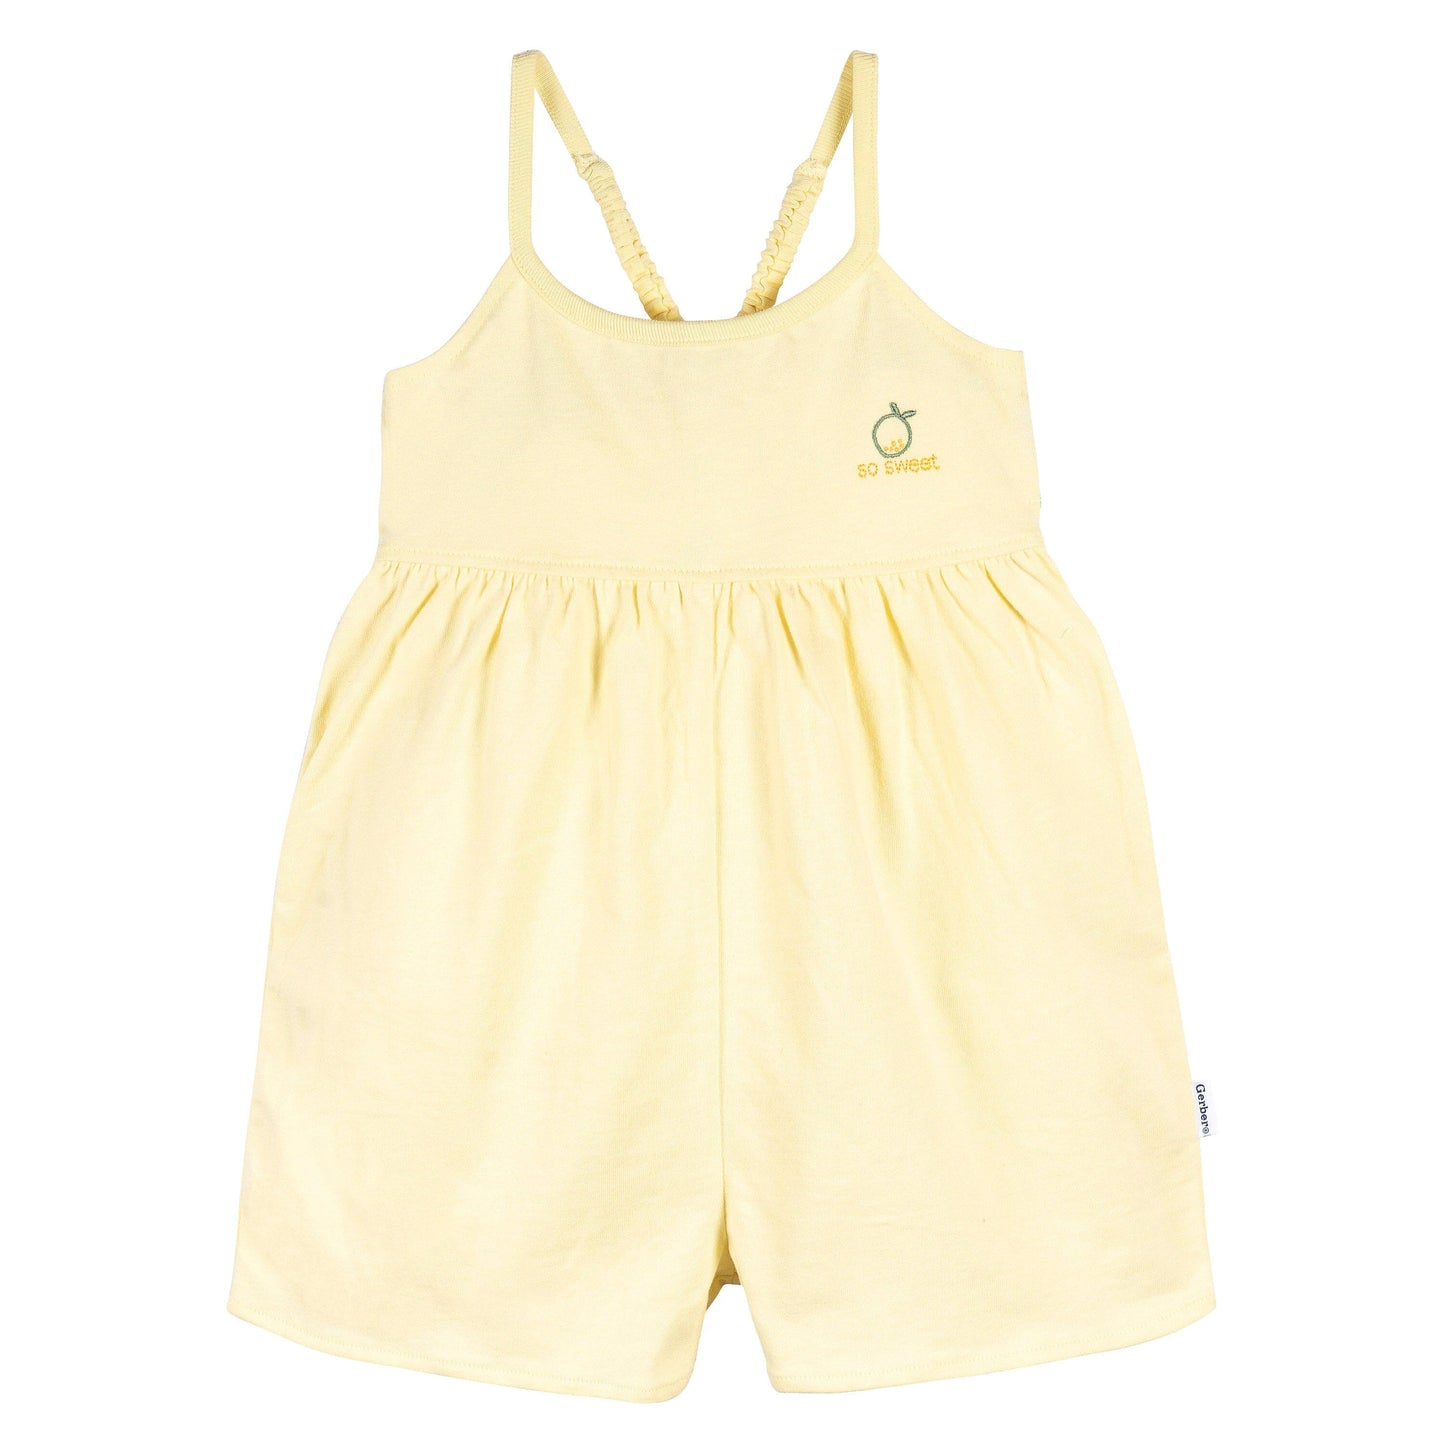 2-Pack Infant and Toddler Girls Yellow & Lemons Rompers